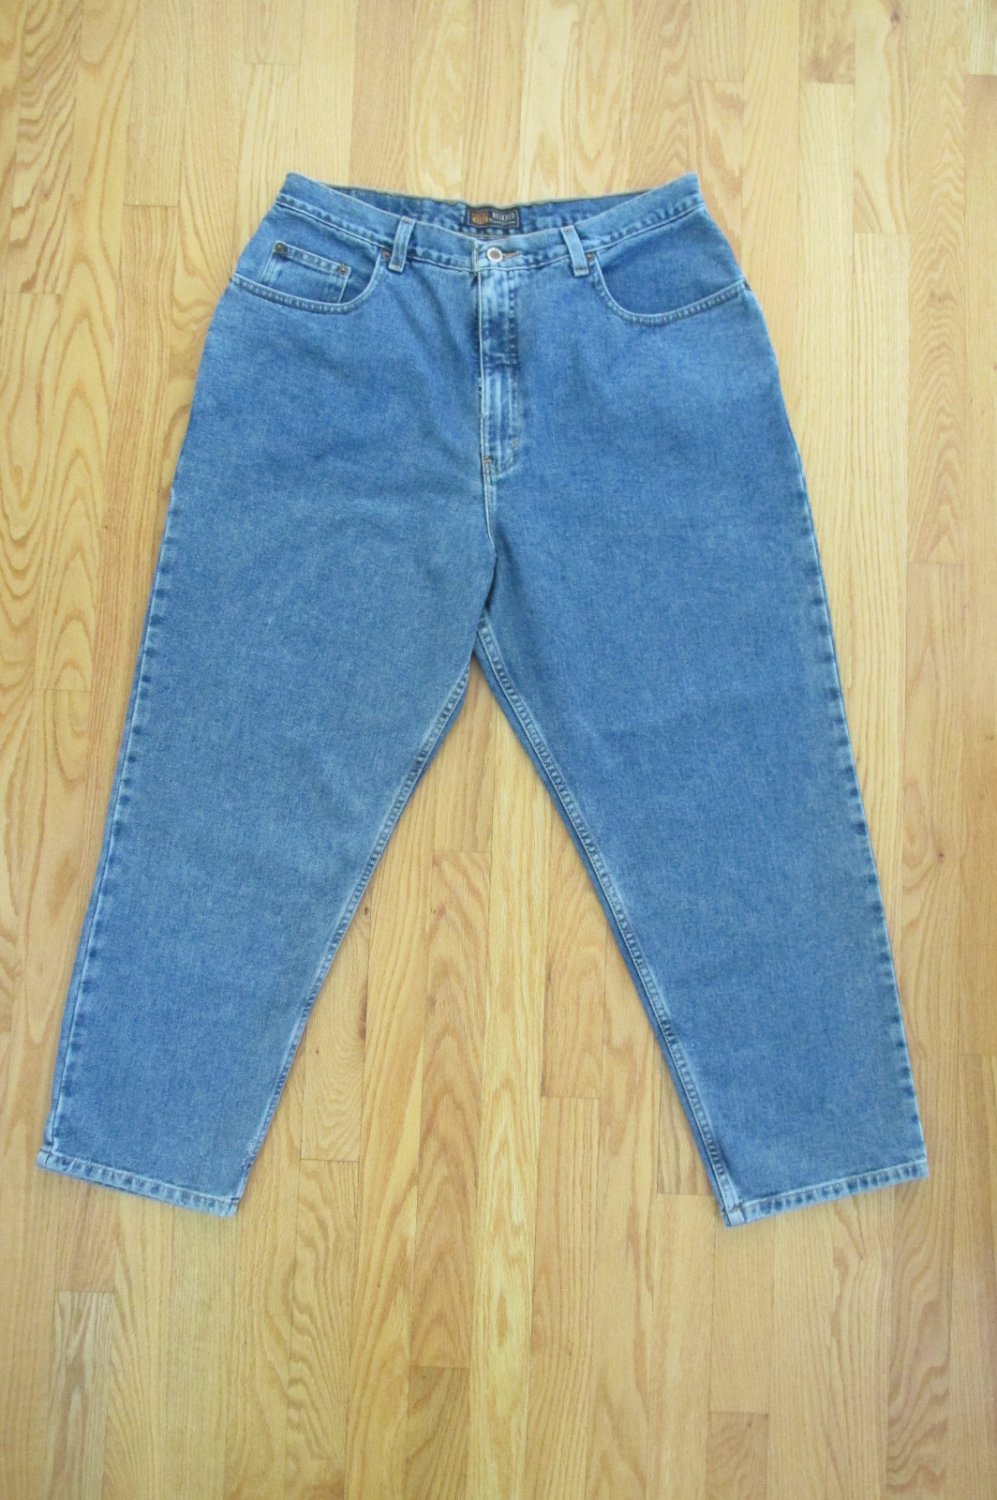 ROUTE 66 WOMEN'S SIZE 18 SHORT JEANS MED BLUE STONE WASHED RELAXED FIT ...